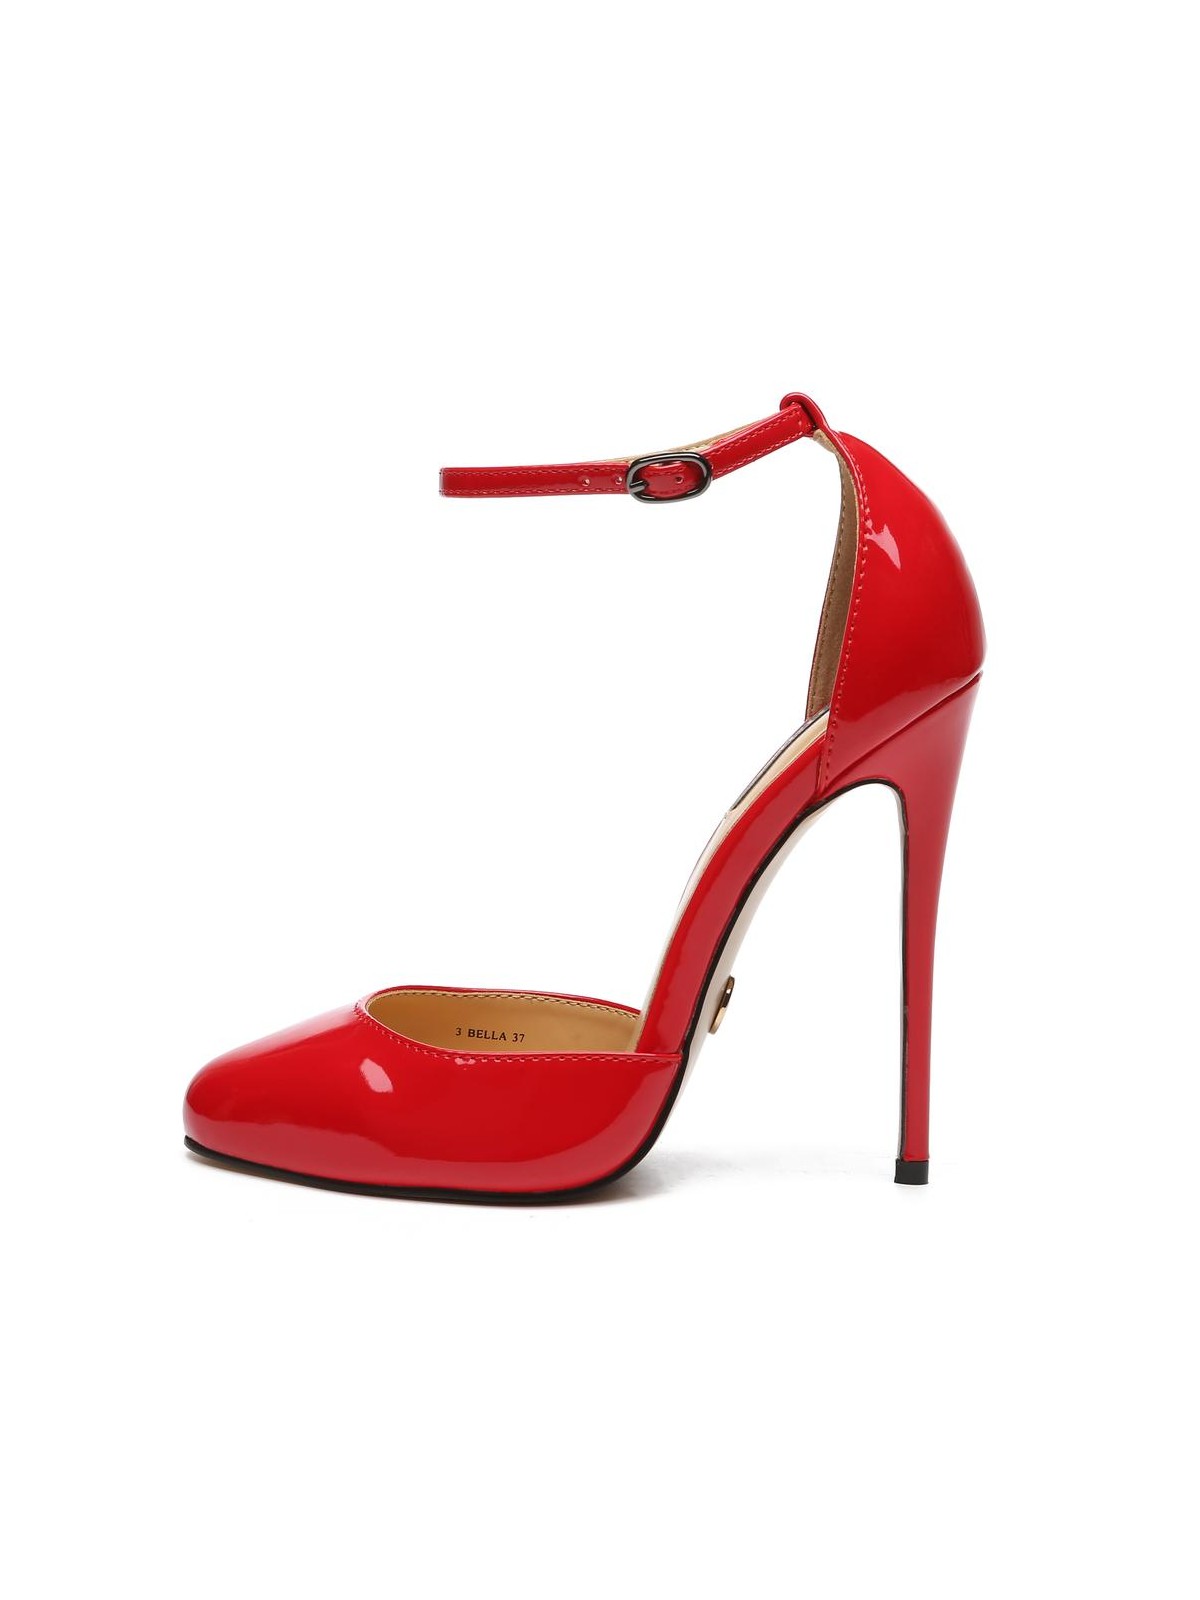 Red High Heels With Ankle Strap Factory Sale | bellvalefarms.com